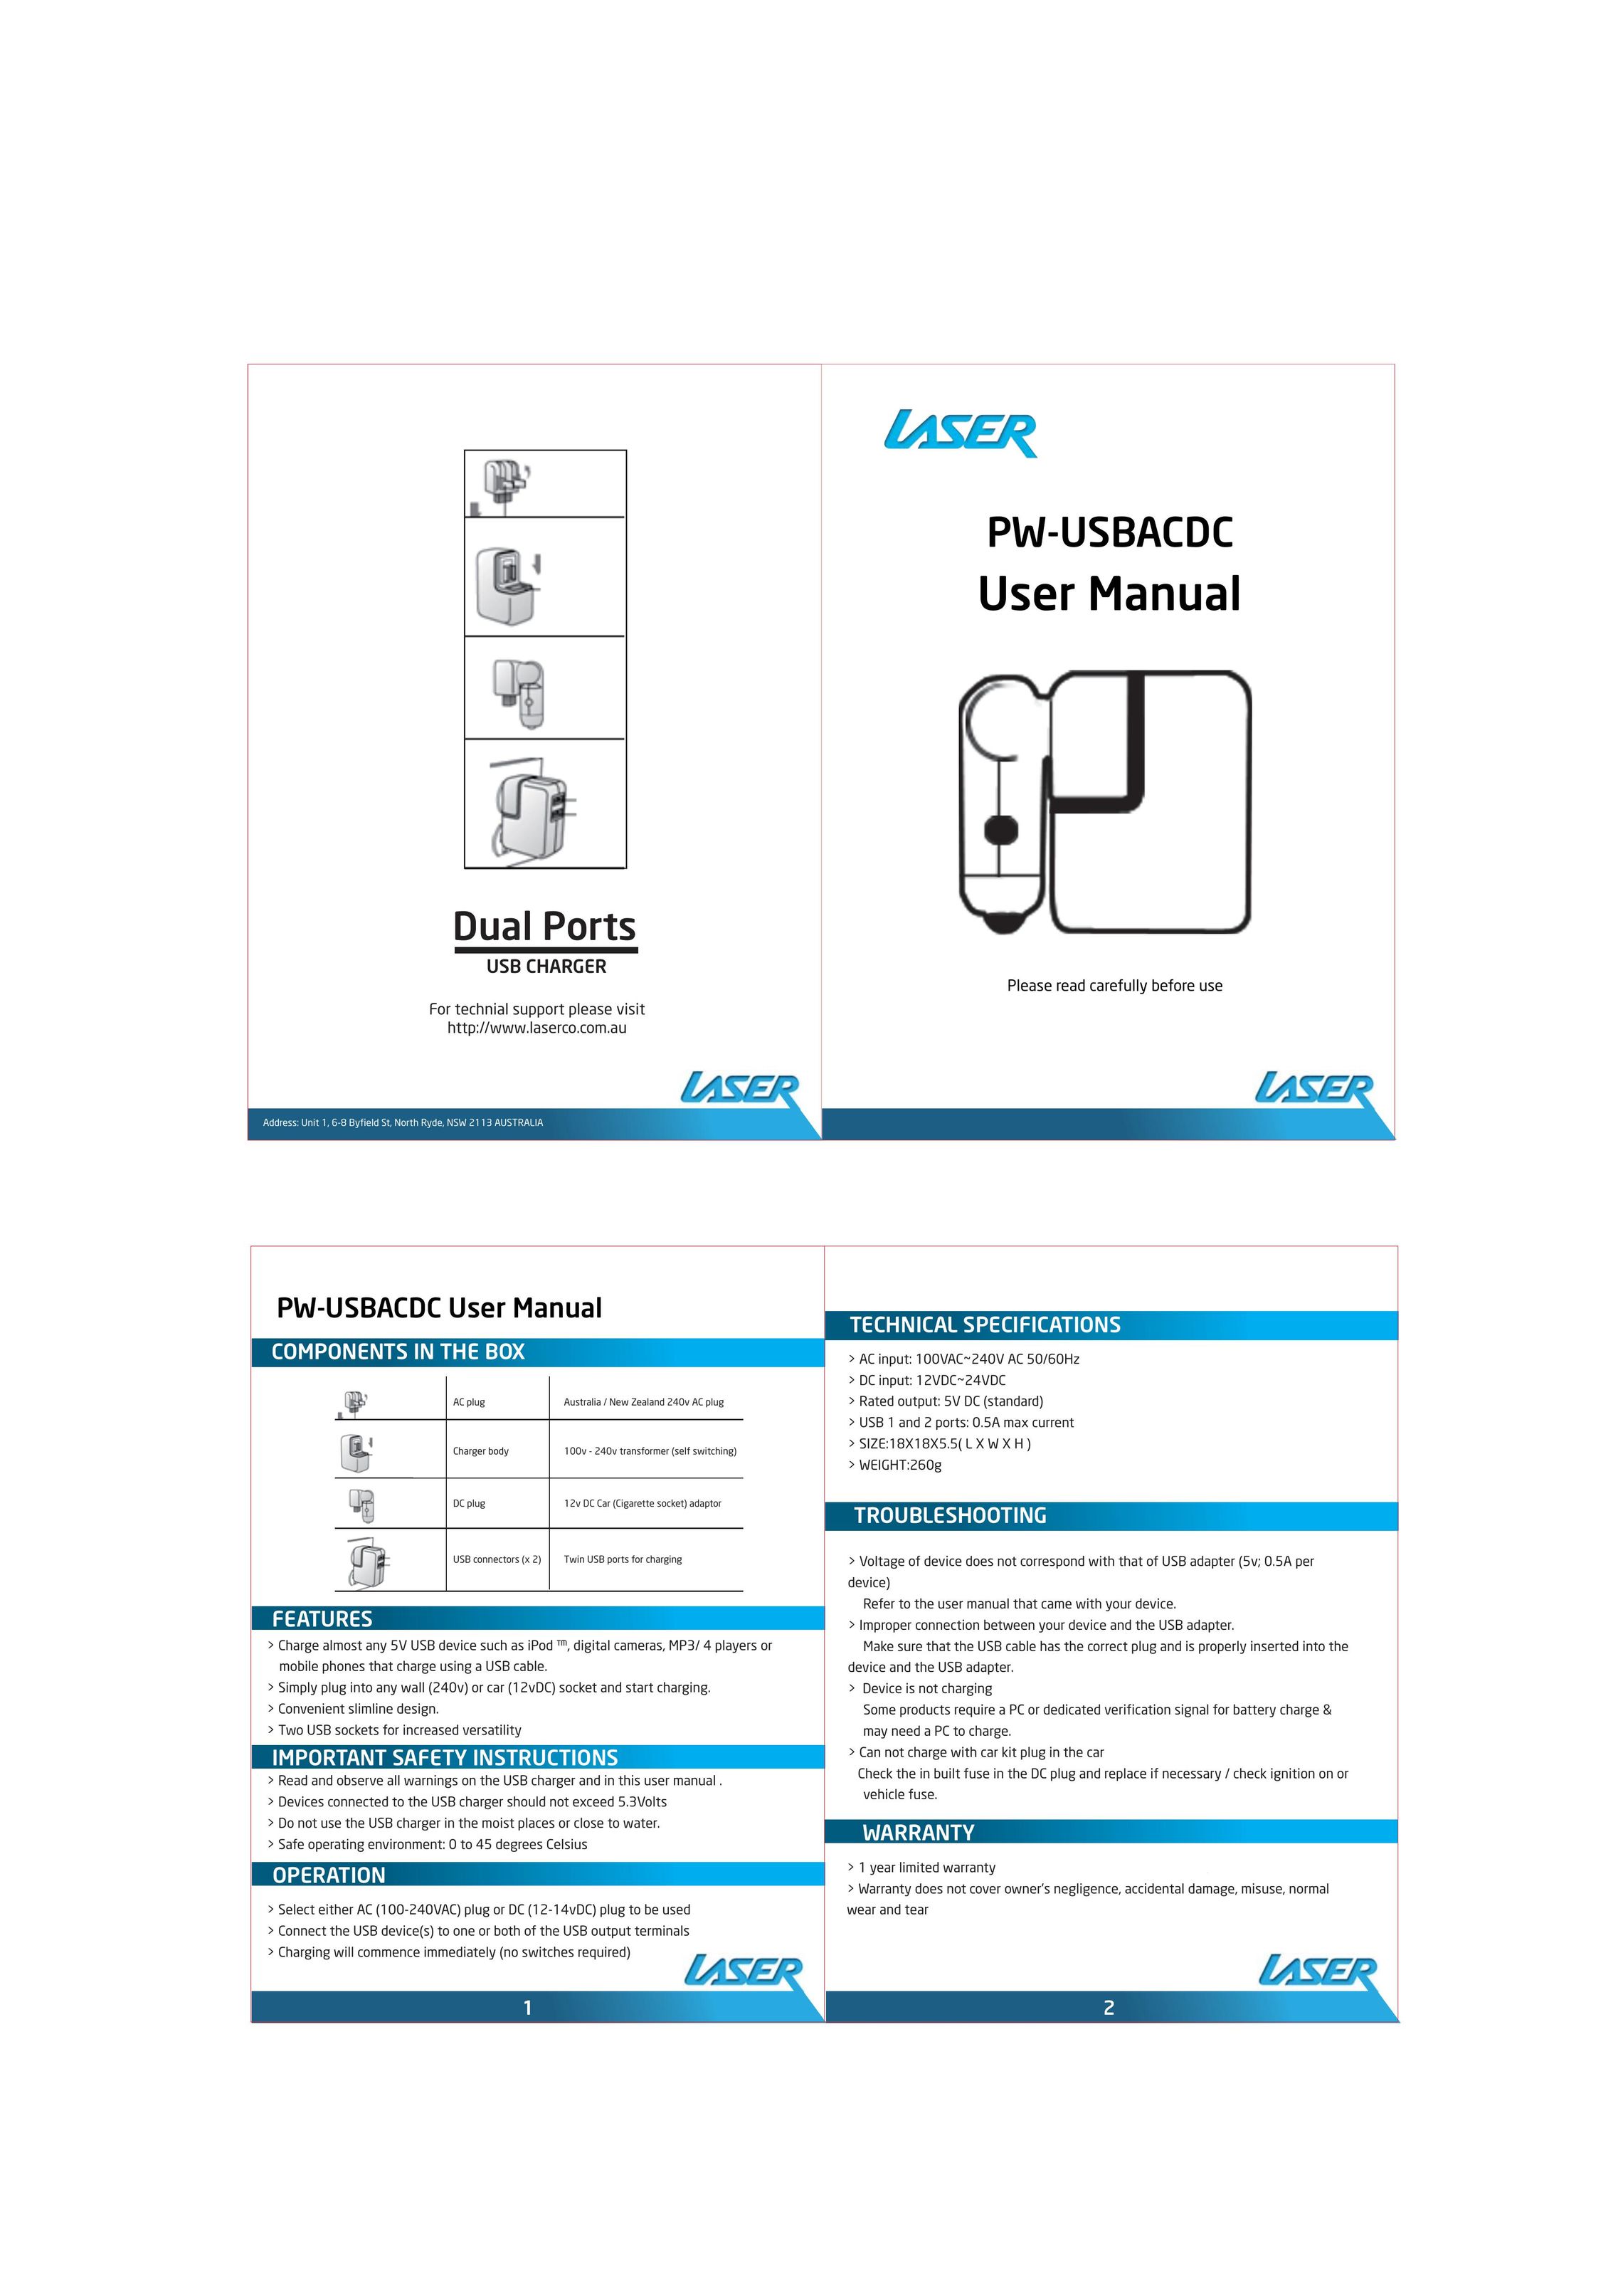 Laser PW-USBACDC Switch User Manual (Page 1)